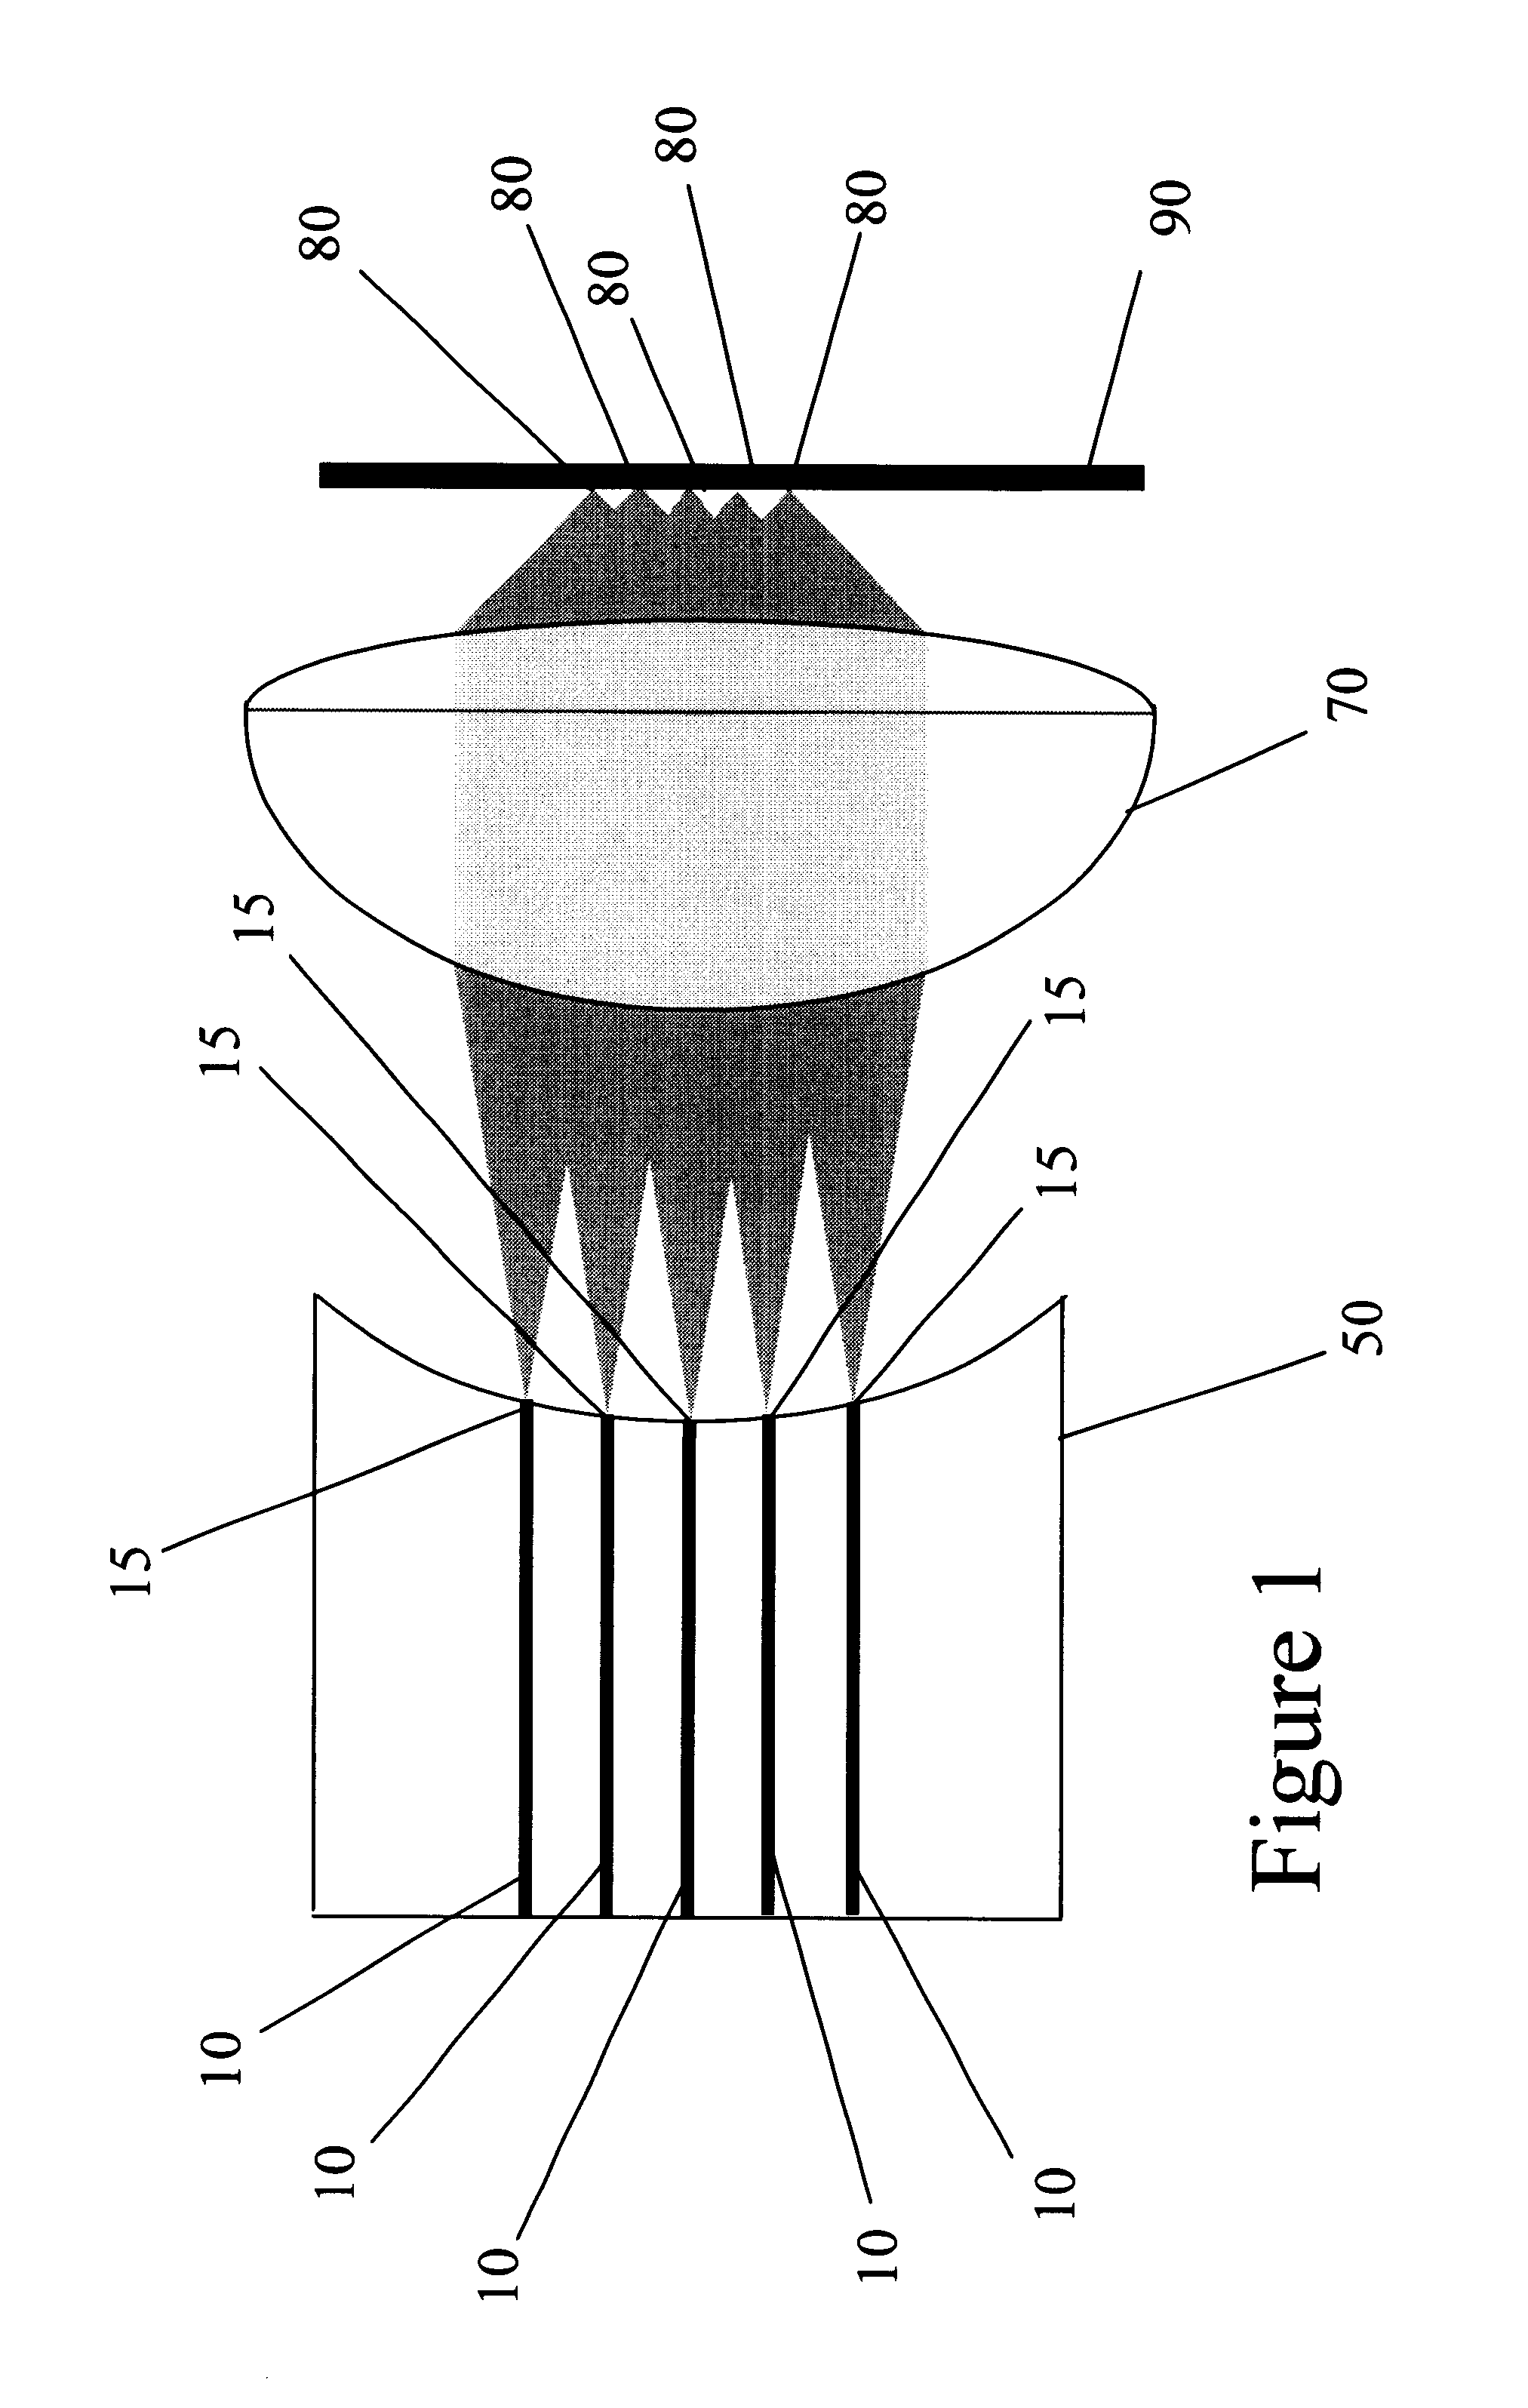 Optical configuration for improved lens performance